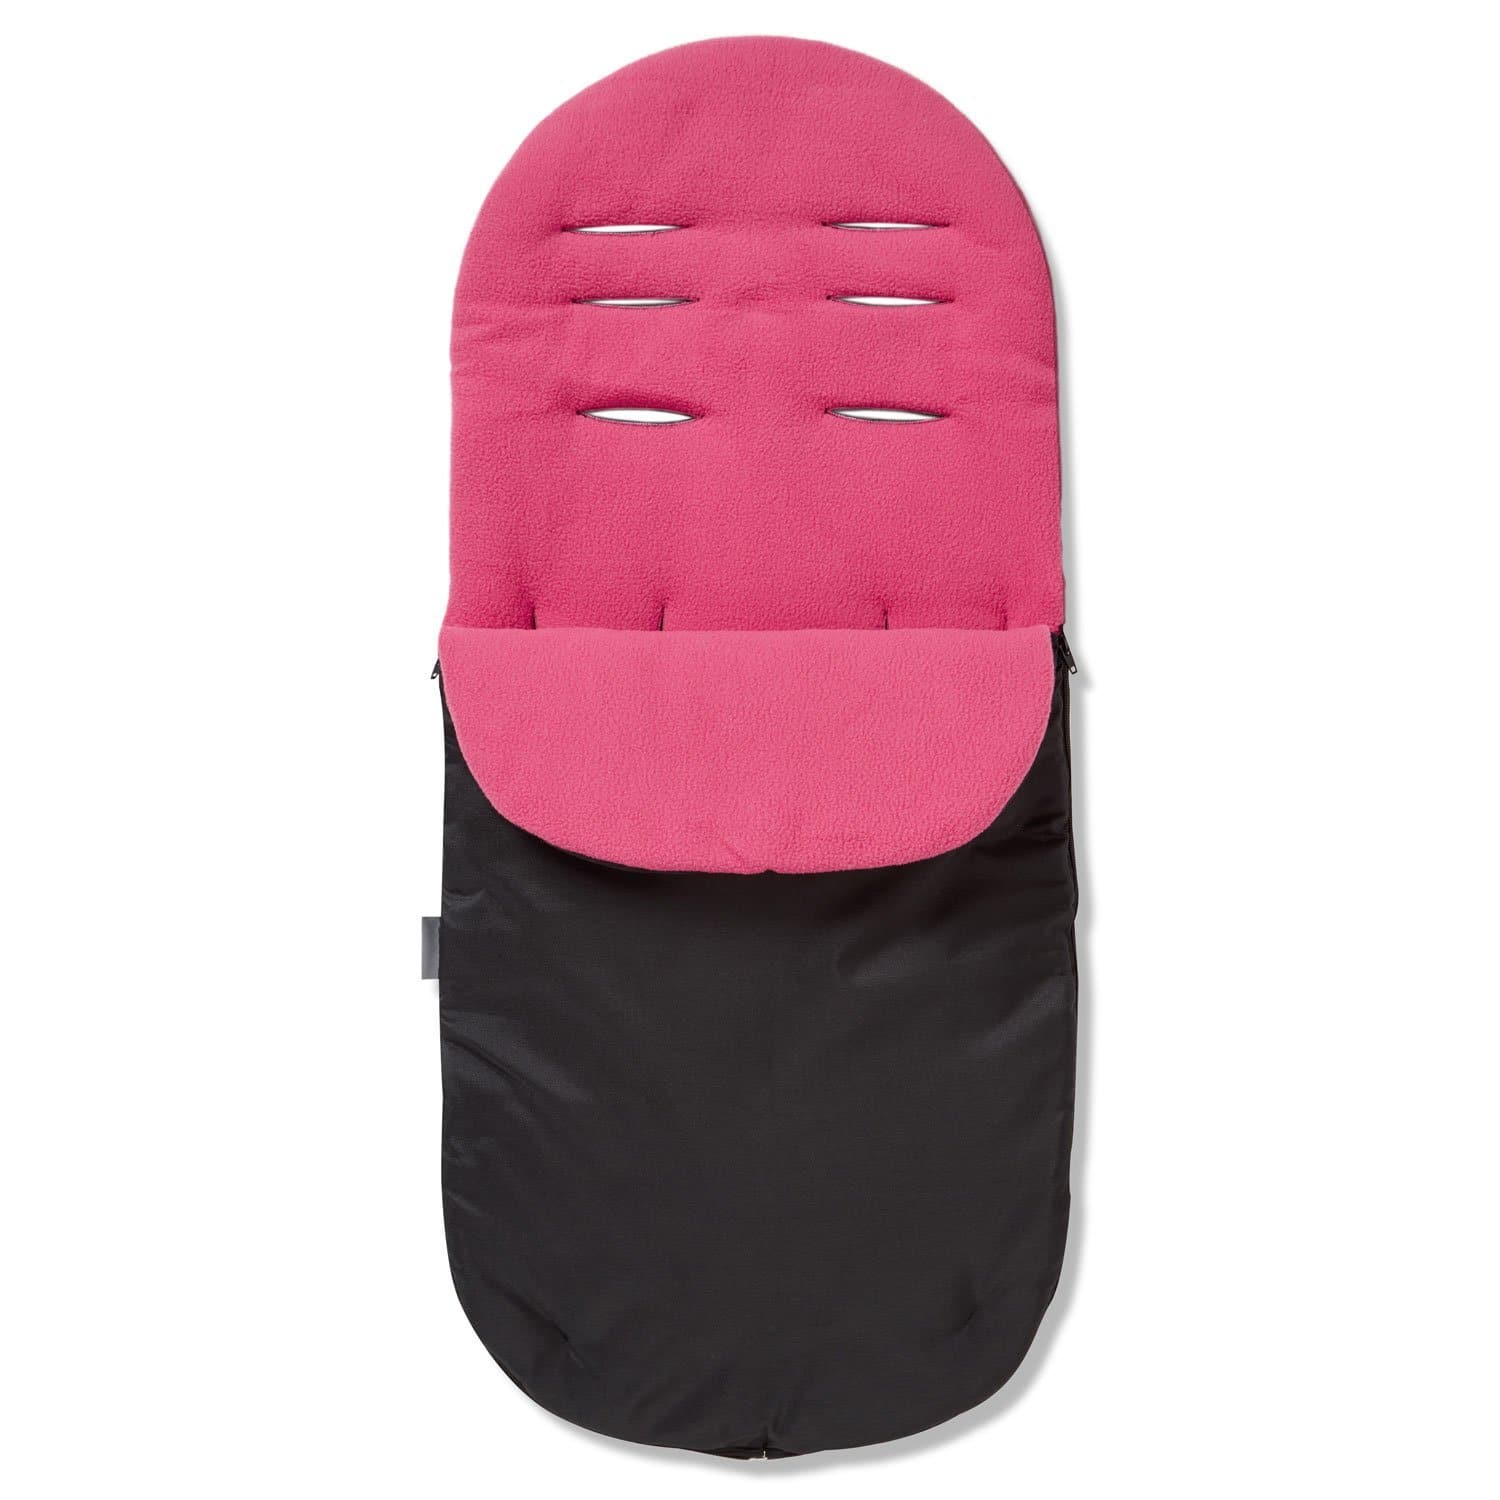 Footmuff / Cosy Toes Compatible with Zooper - Dark Pink / Fits All Models | For Your Little One